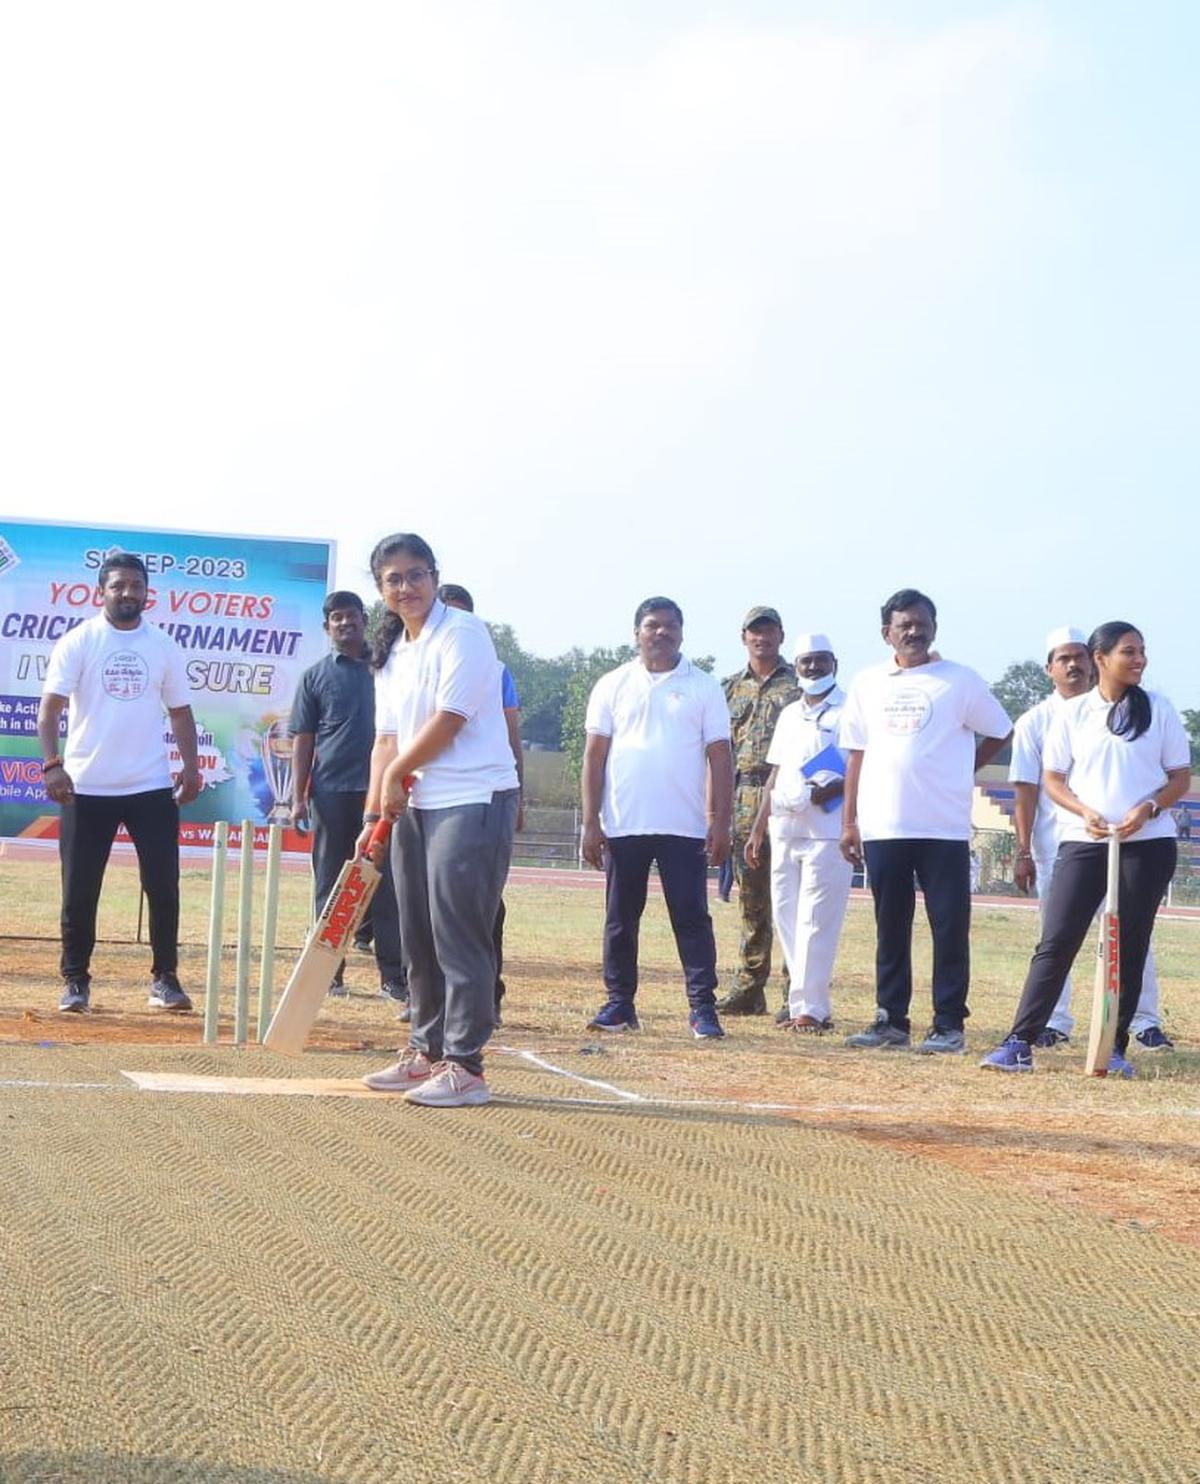 District Collector of Hanumakonda Sikta Patnaik trying her hand at playing a shot in the cricket match organised to create awareness among young voters on Sunday.